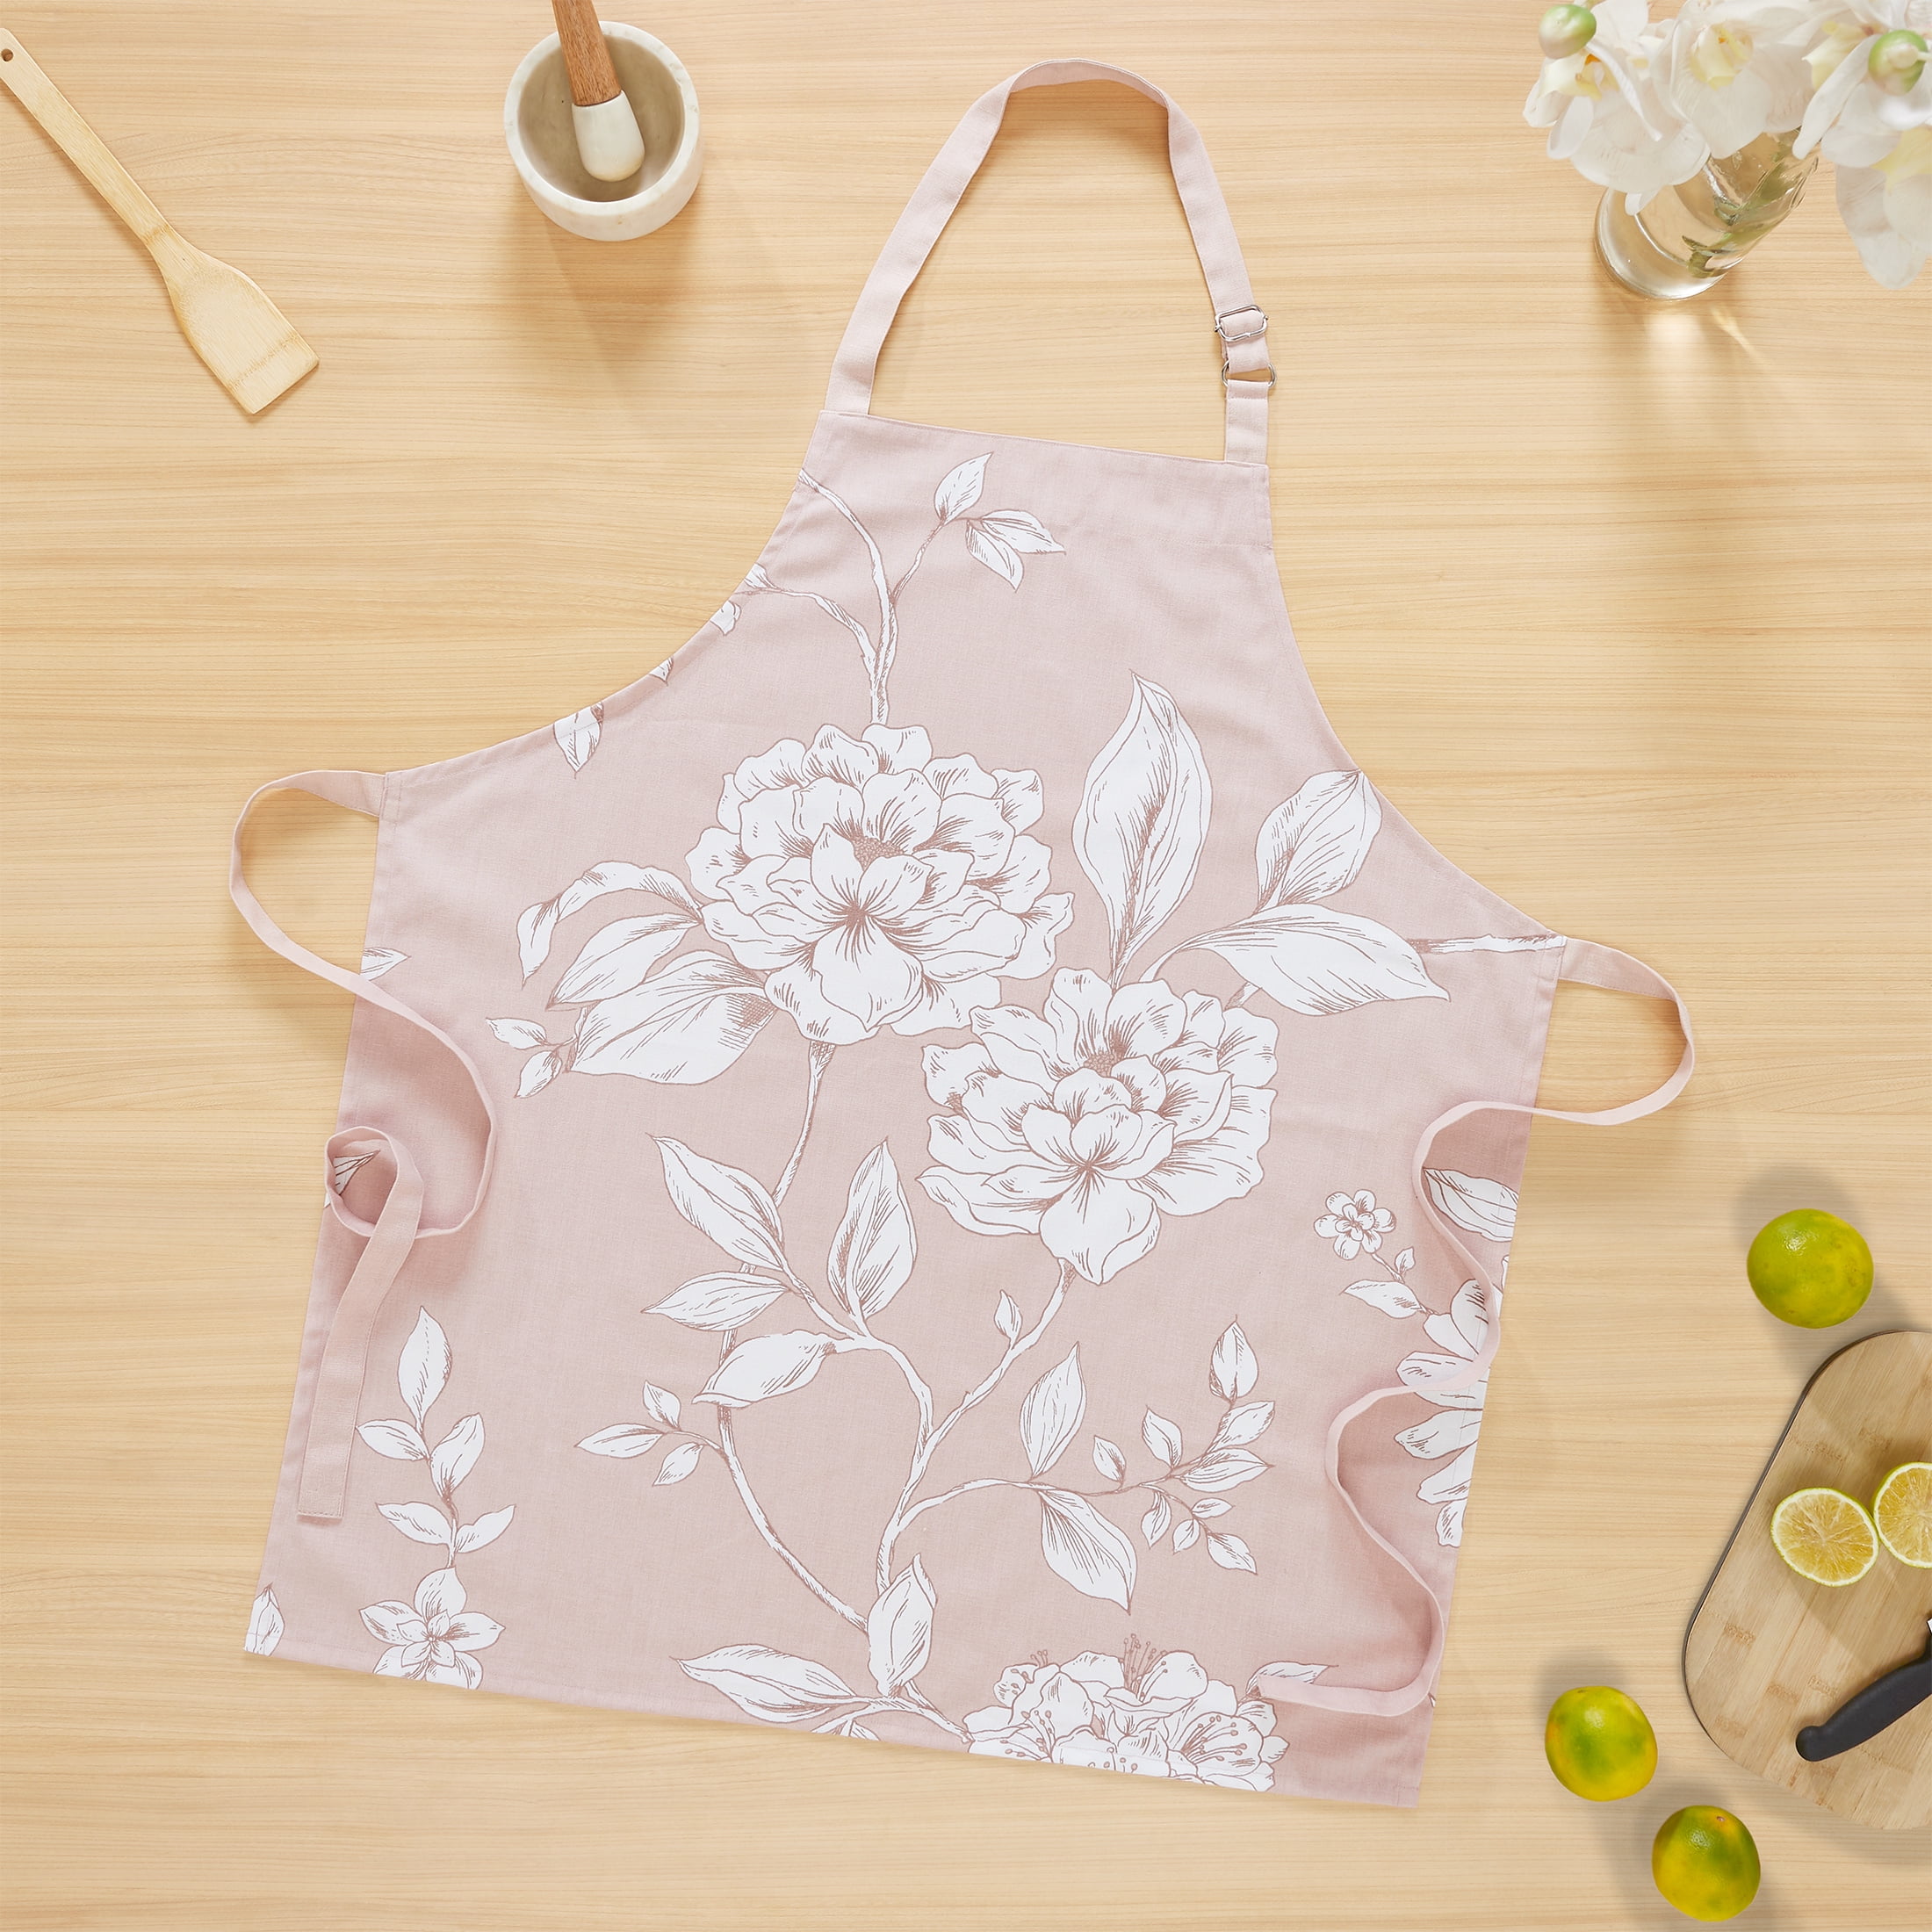 Polyester Aprons, Waterproof Flowers Birds Print Kitchen Apron For